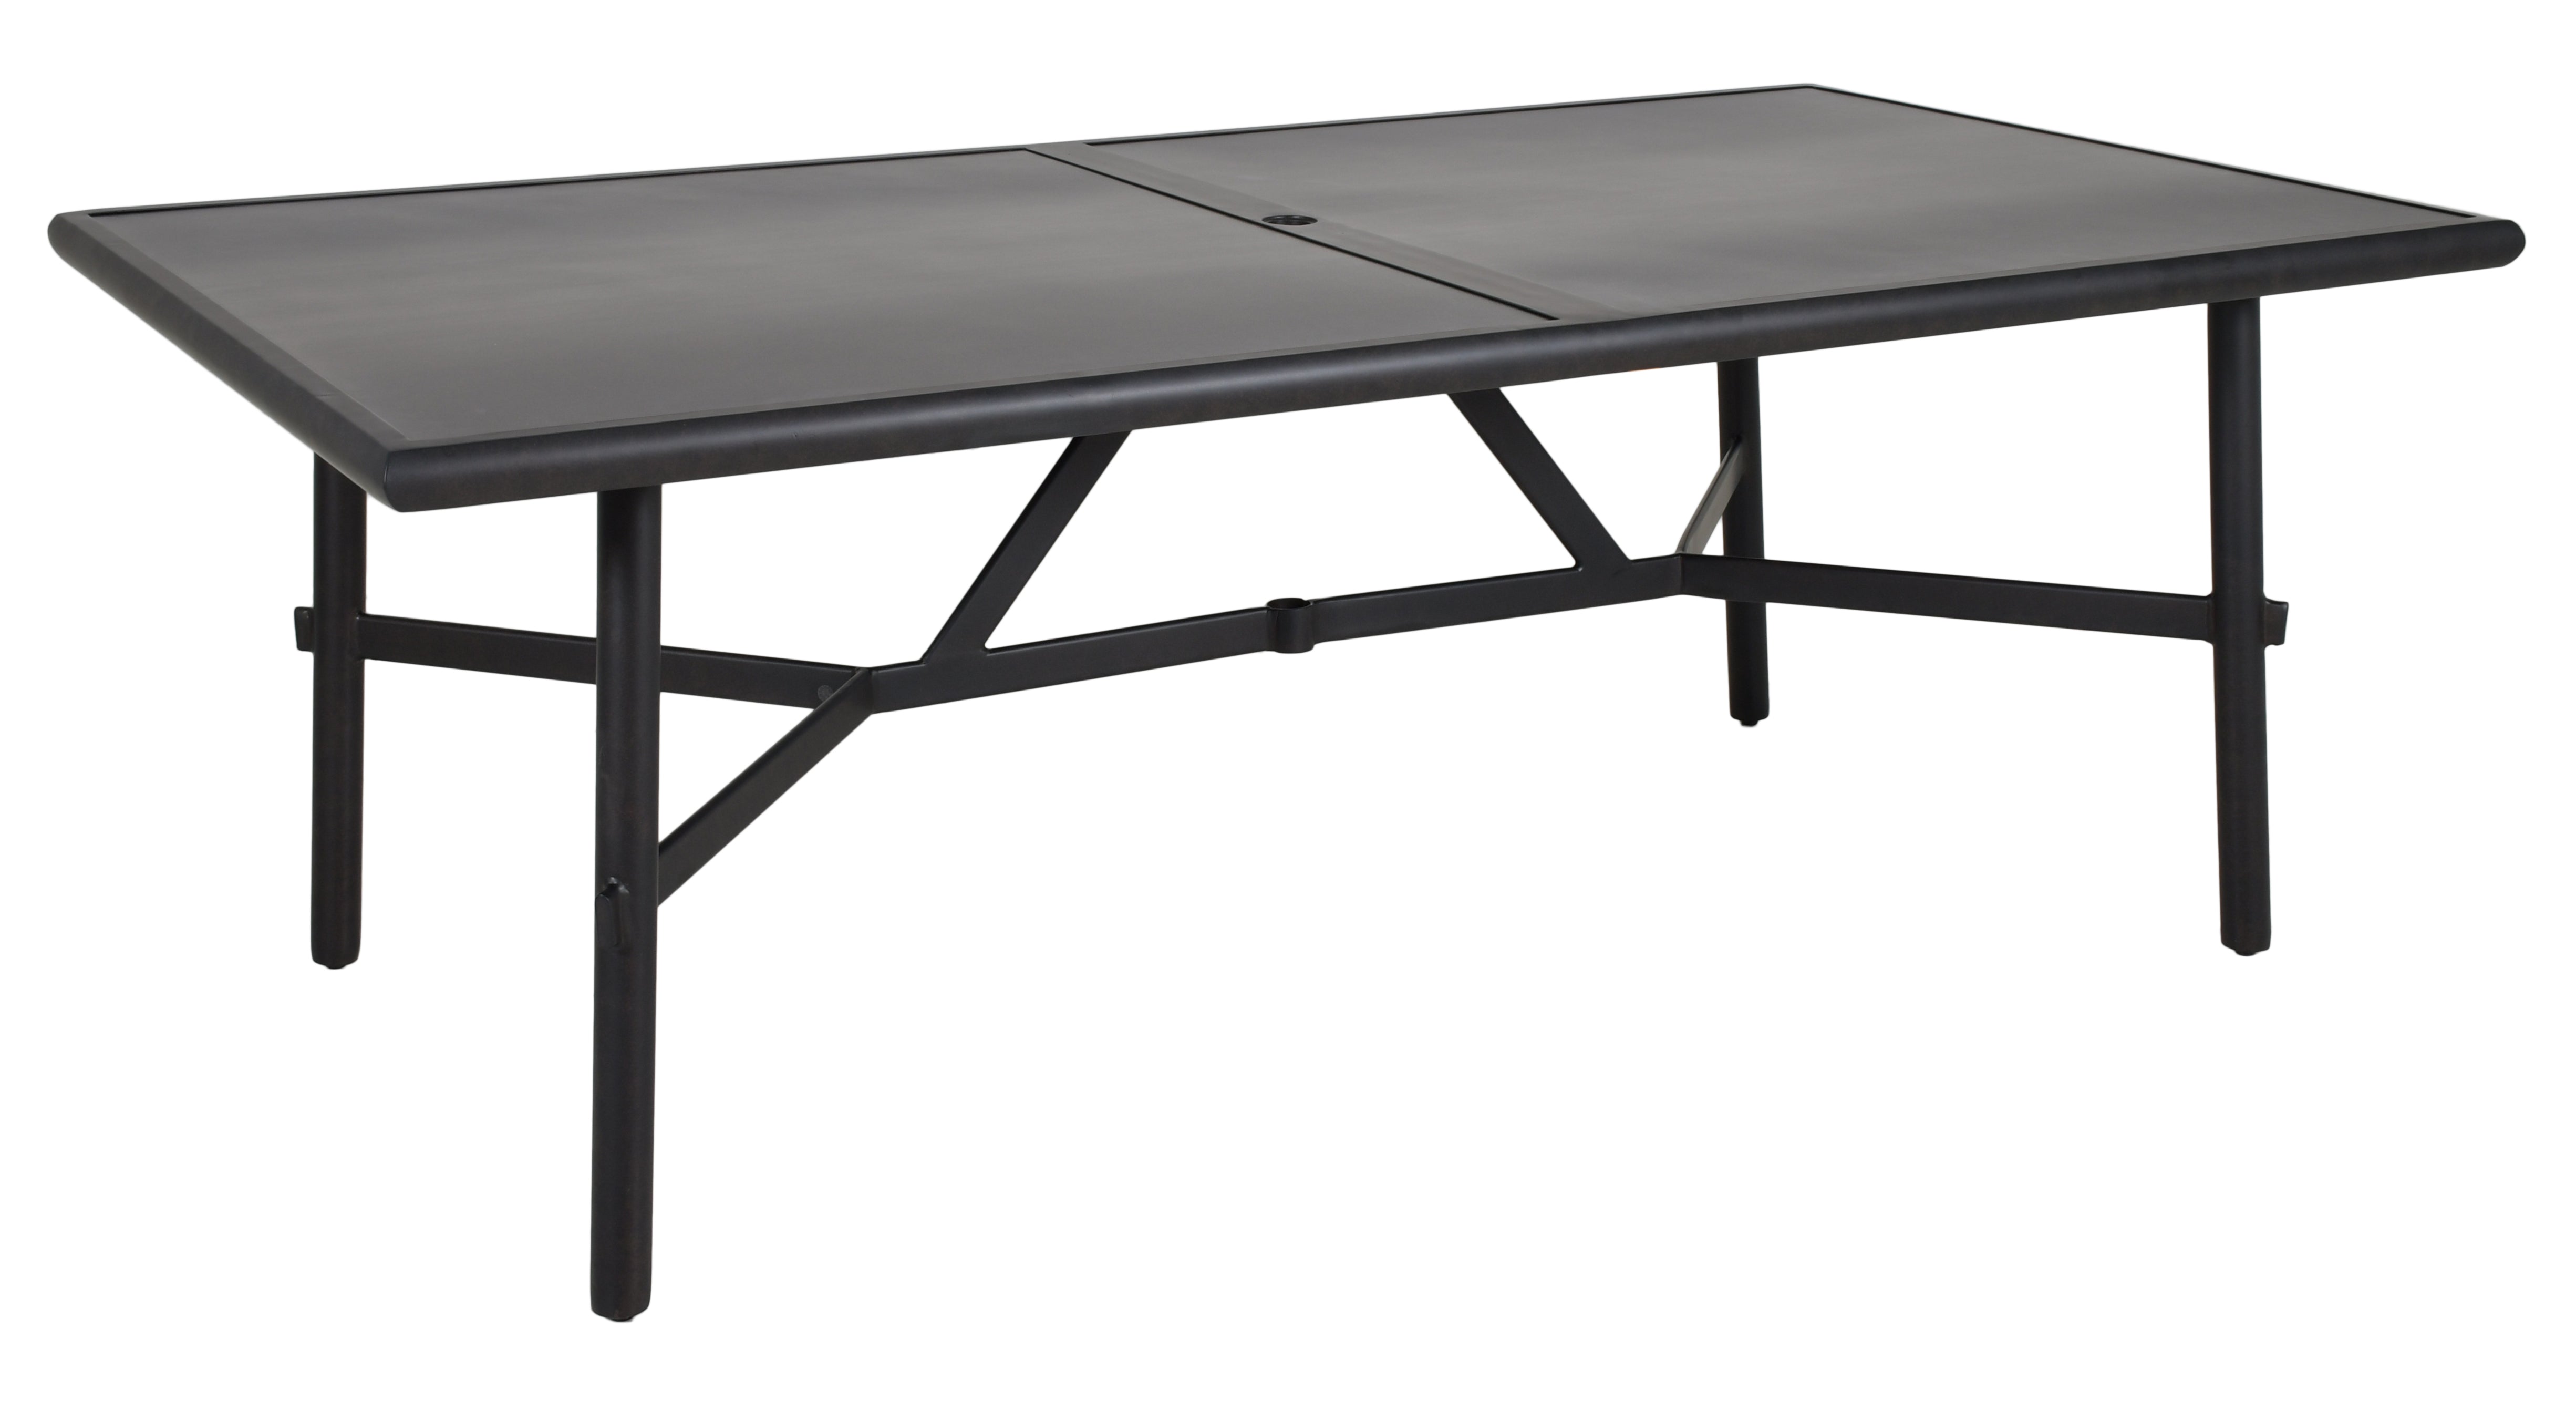 Barbados 42" x 78" Rectangular Dining Table By Castelle